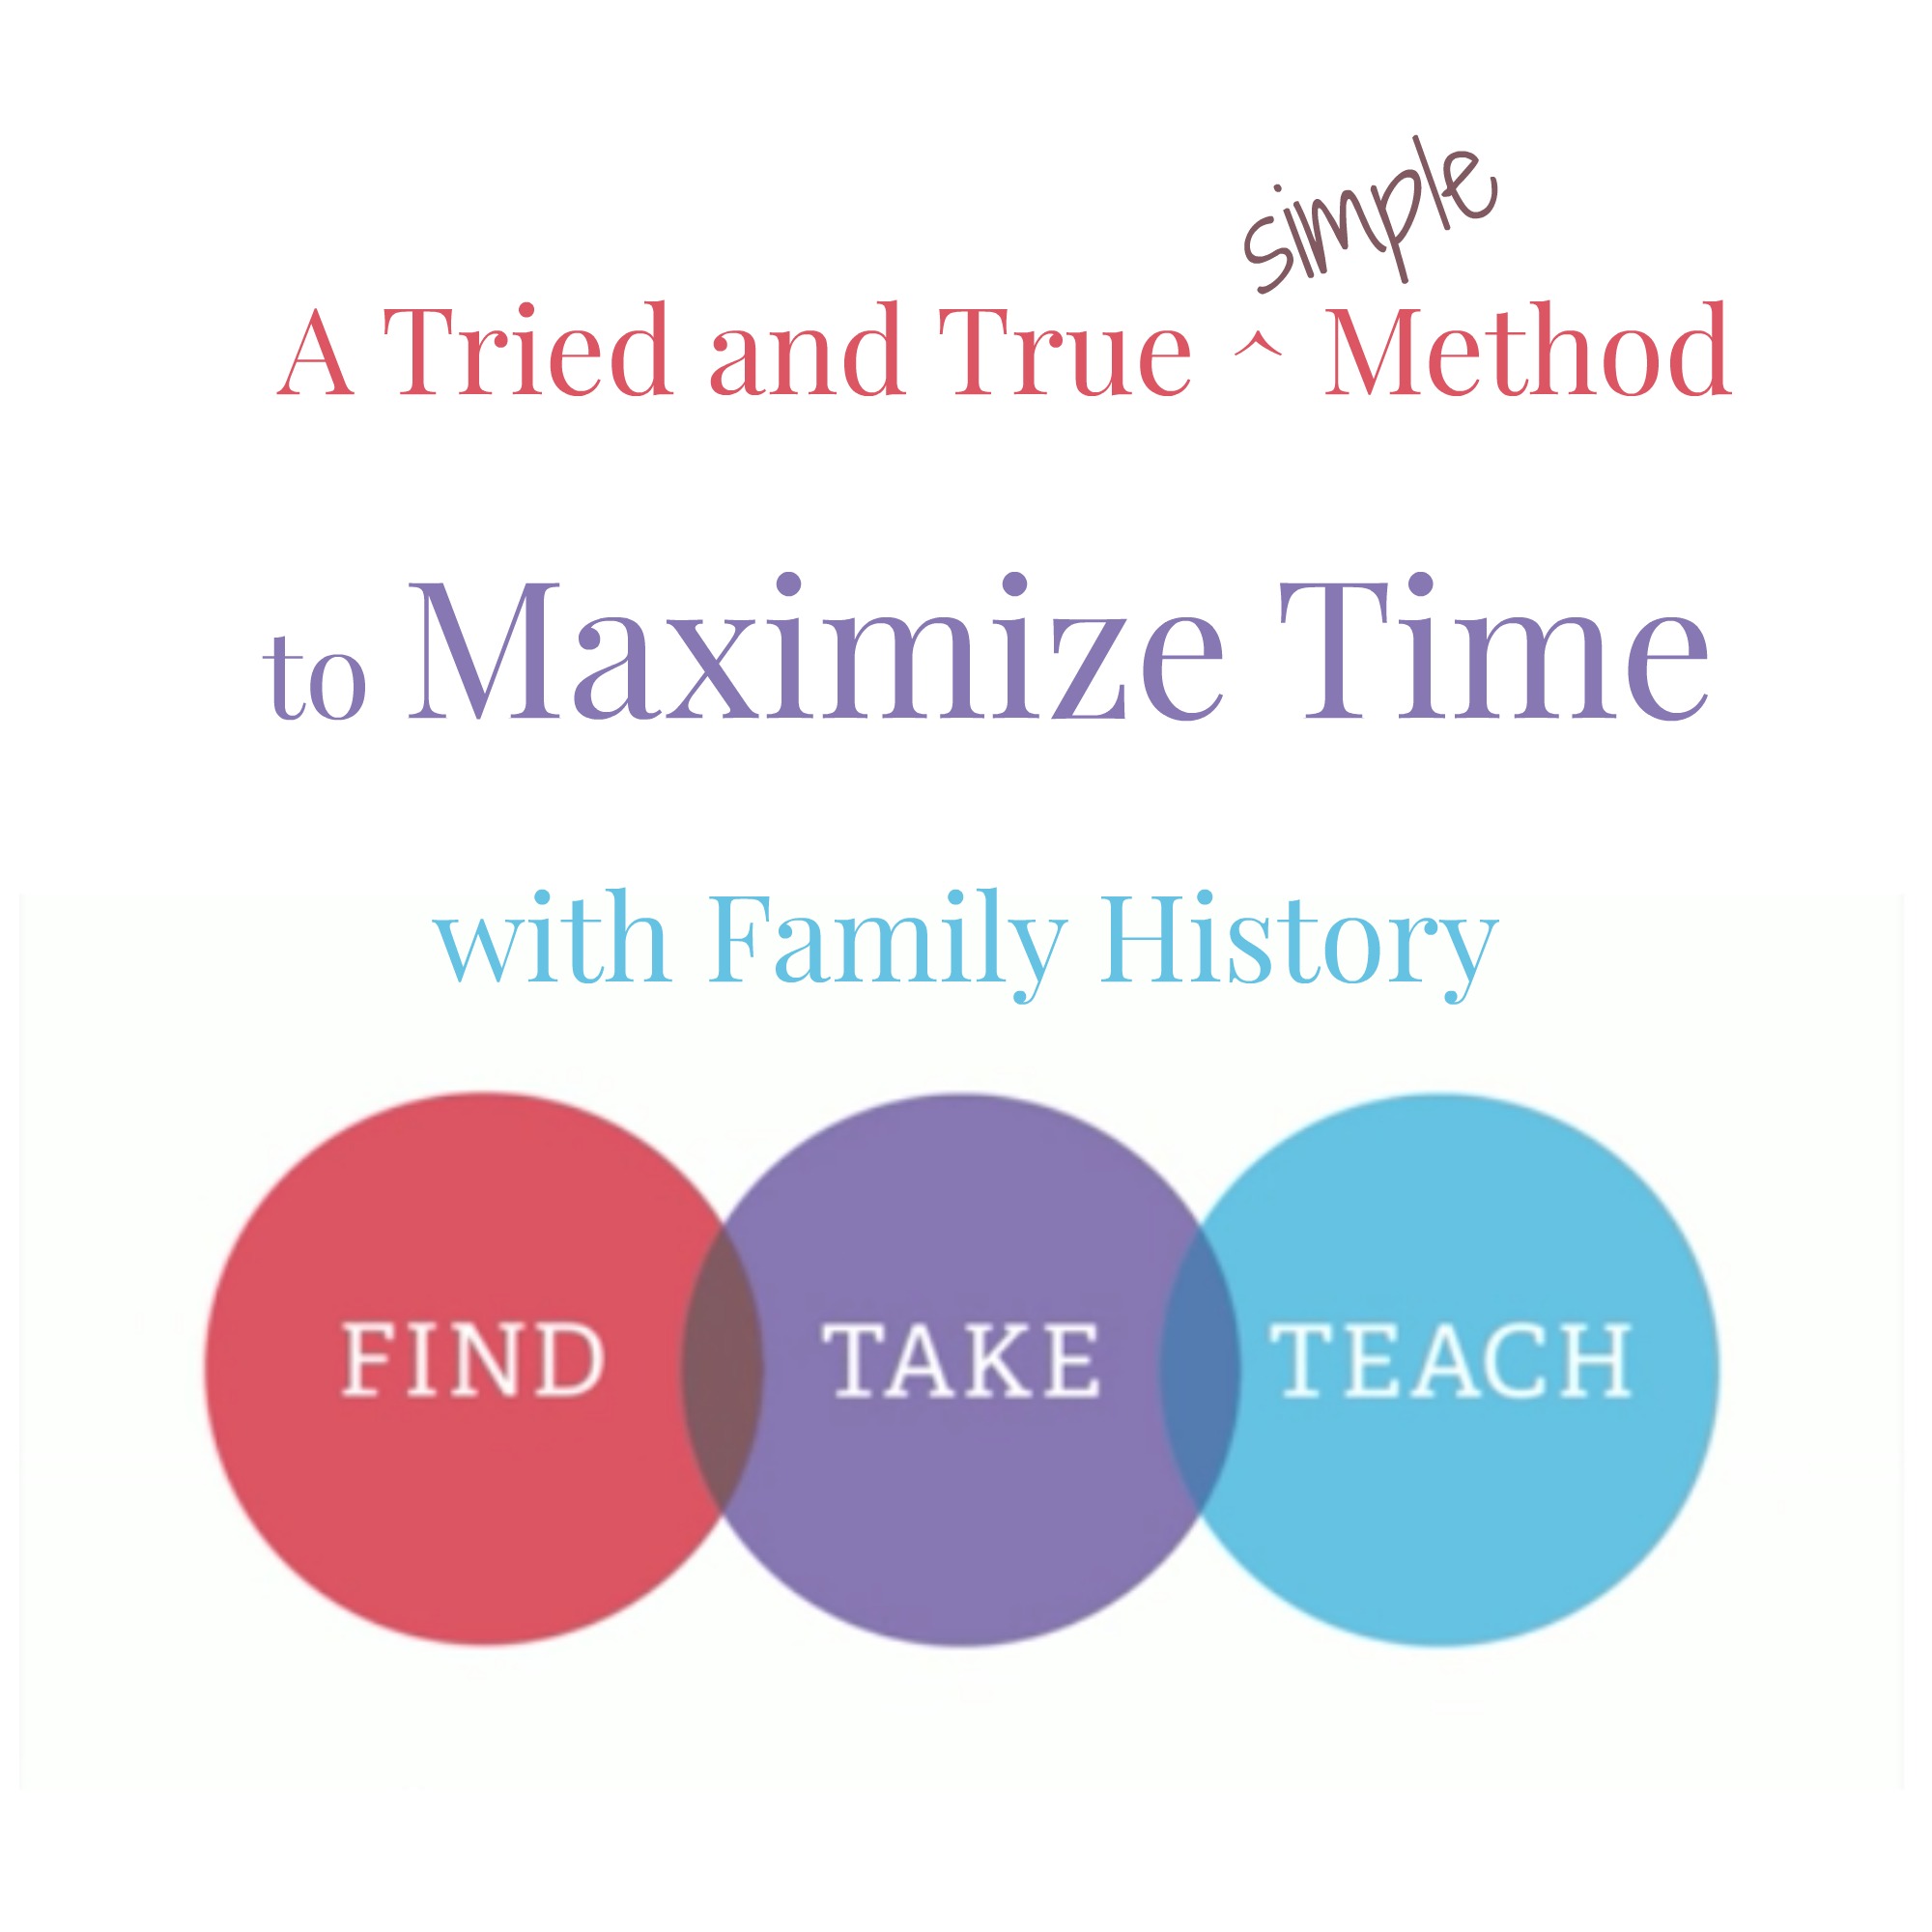 Are you interested in doing Family History work, but don't have much time? Use this tried and true formula to maximize your time to find, take, teach!